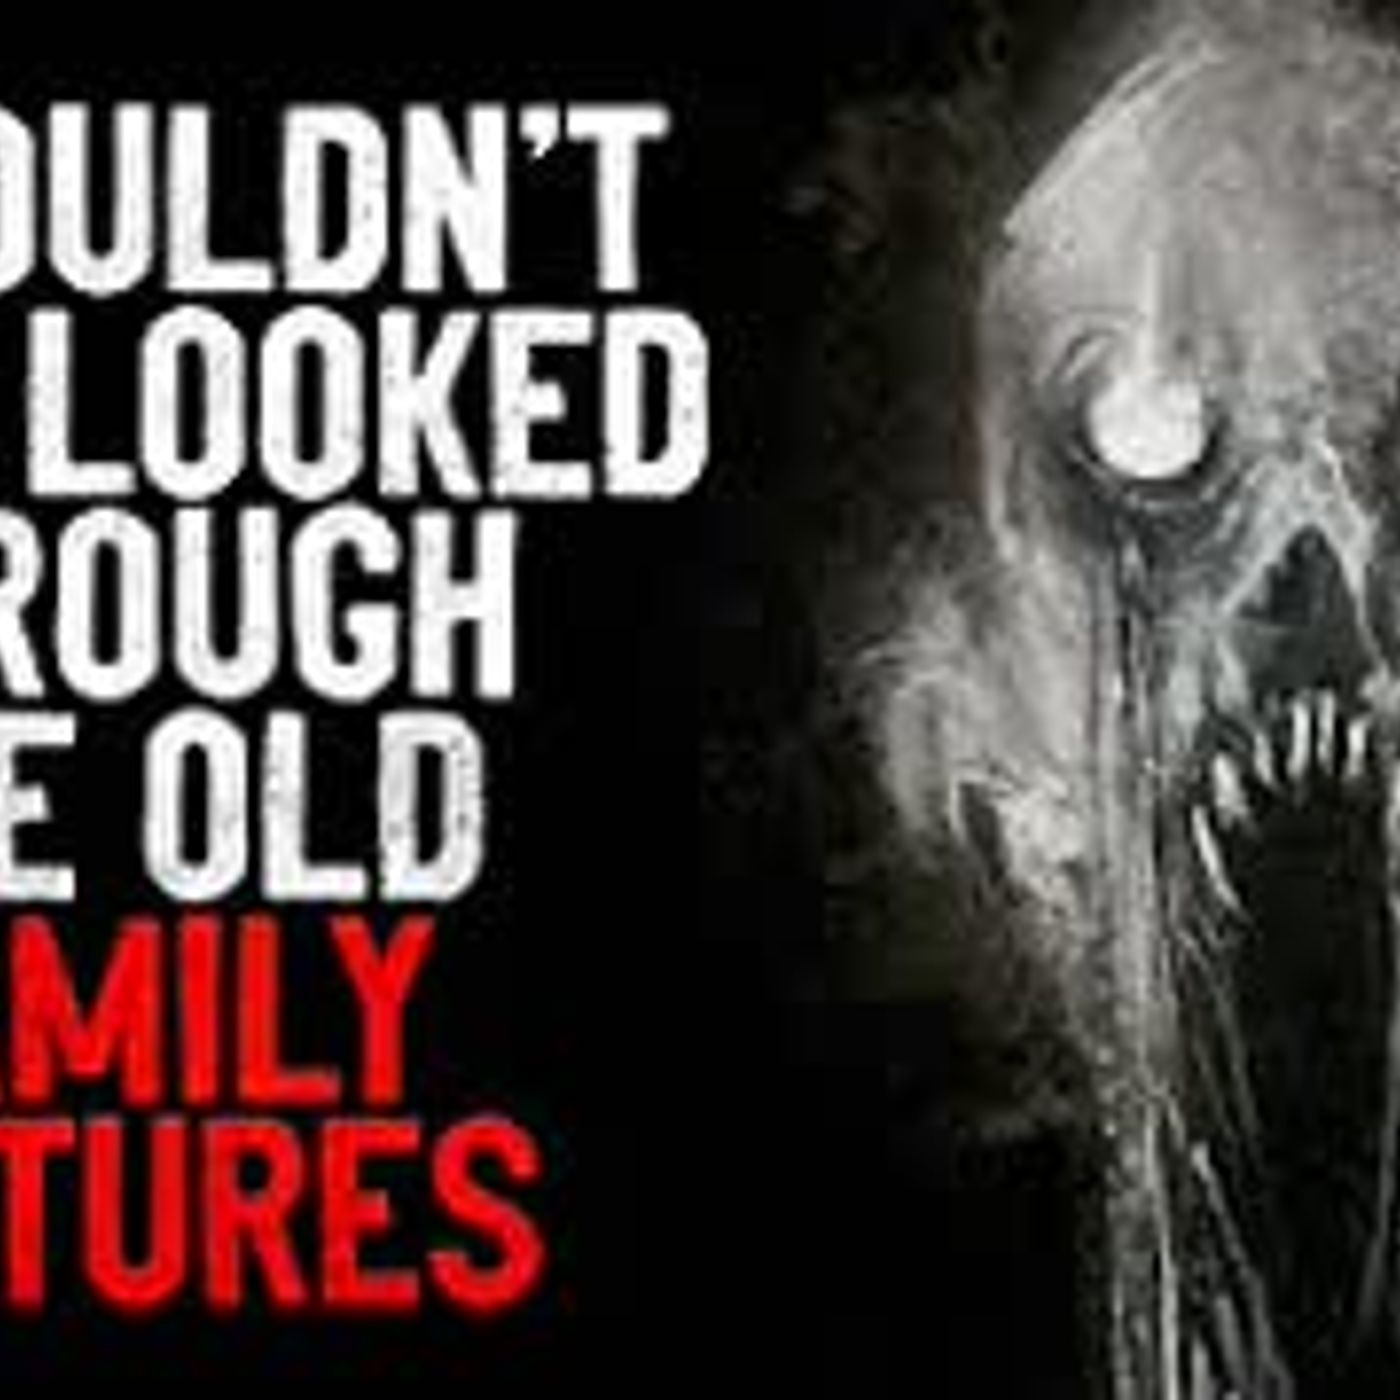 "I shouldn't have looked through the old family pictures" Creepypasta